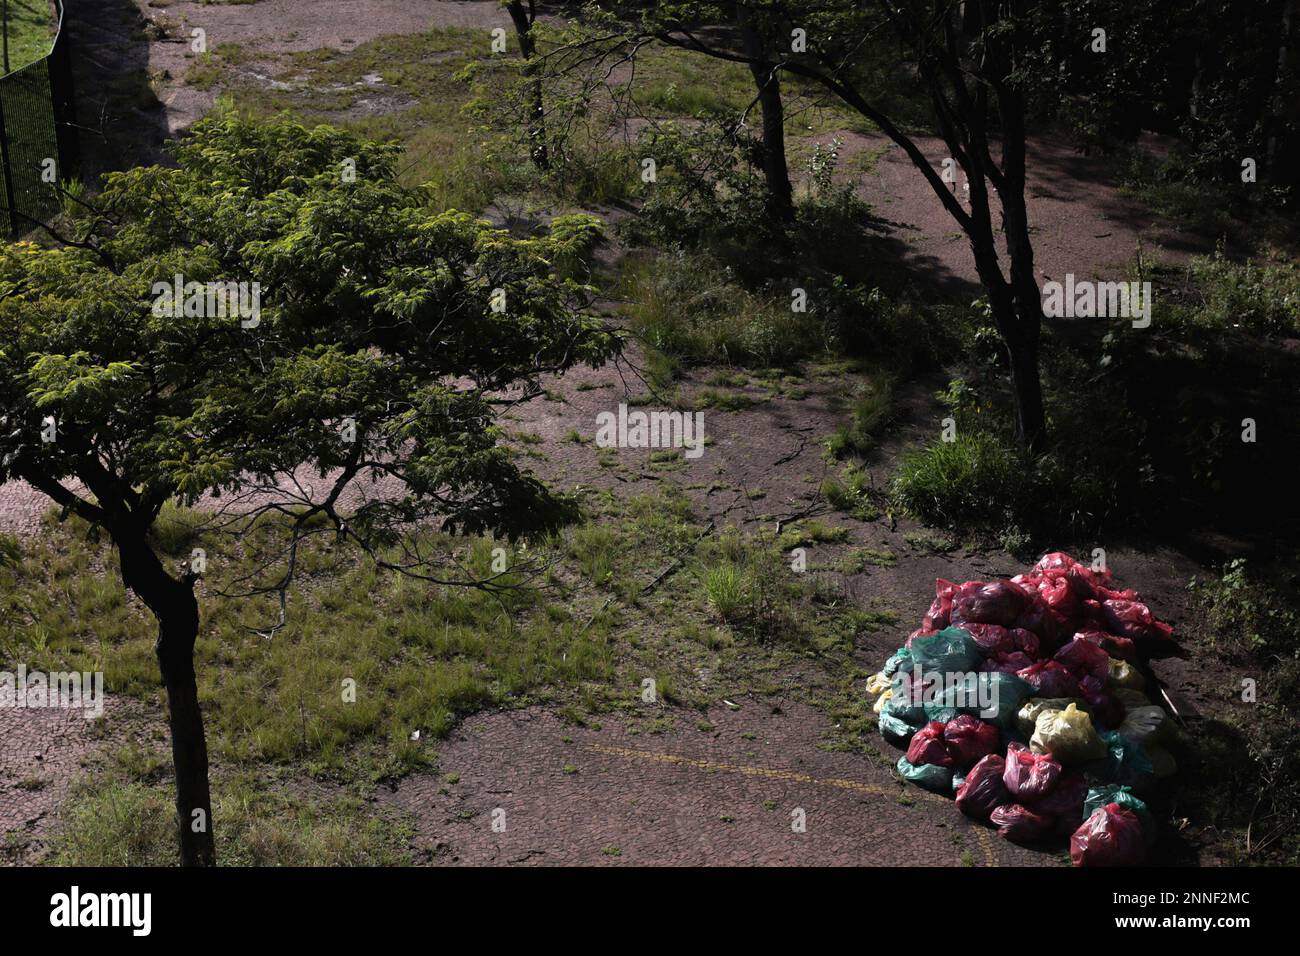 https://c8.alamy.com/comp/2NNF2MC/sp-sao-paulo-04242021-sao-paulo-bras-cptm-station-movement-garbage-bags-are-seen-next-to-trees-on-land-next-to-the-bras-station-of-the-companhia-paulista-de-trens-metropolitanos-cptm-east-side-of-the-city-of-sao-paulo-this-saturday-24-photo-ettore-chiereguini-agif-via-ap-2NNF2MC.jpg